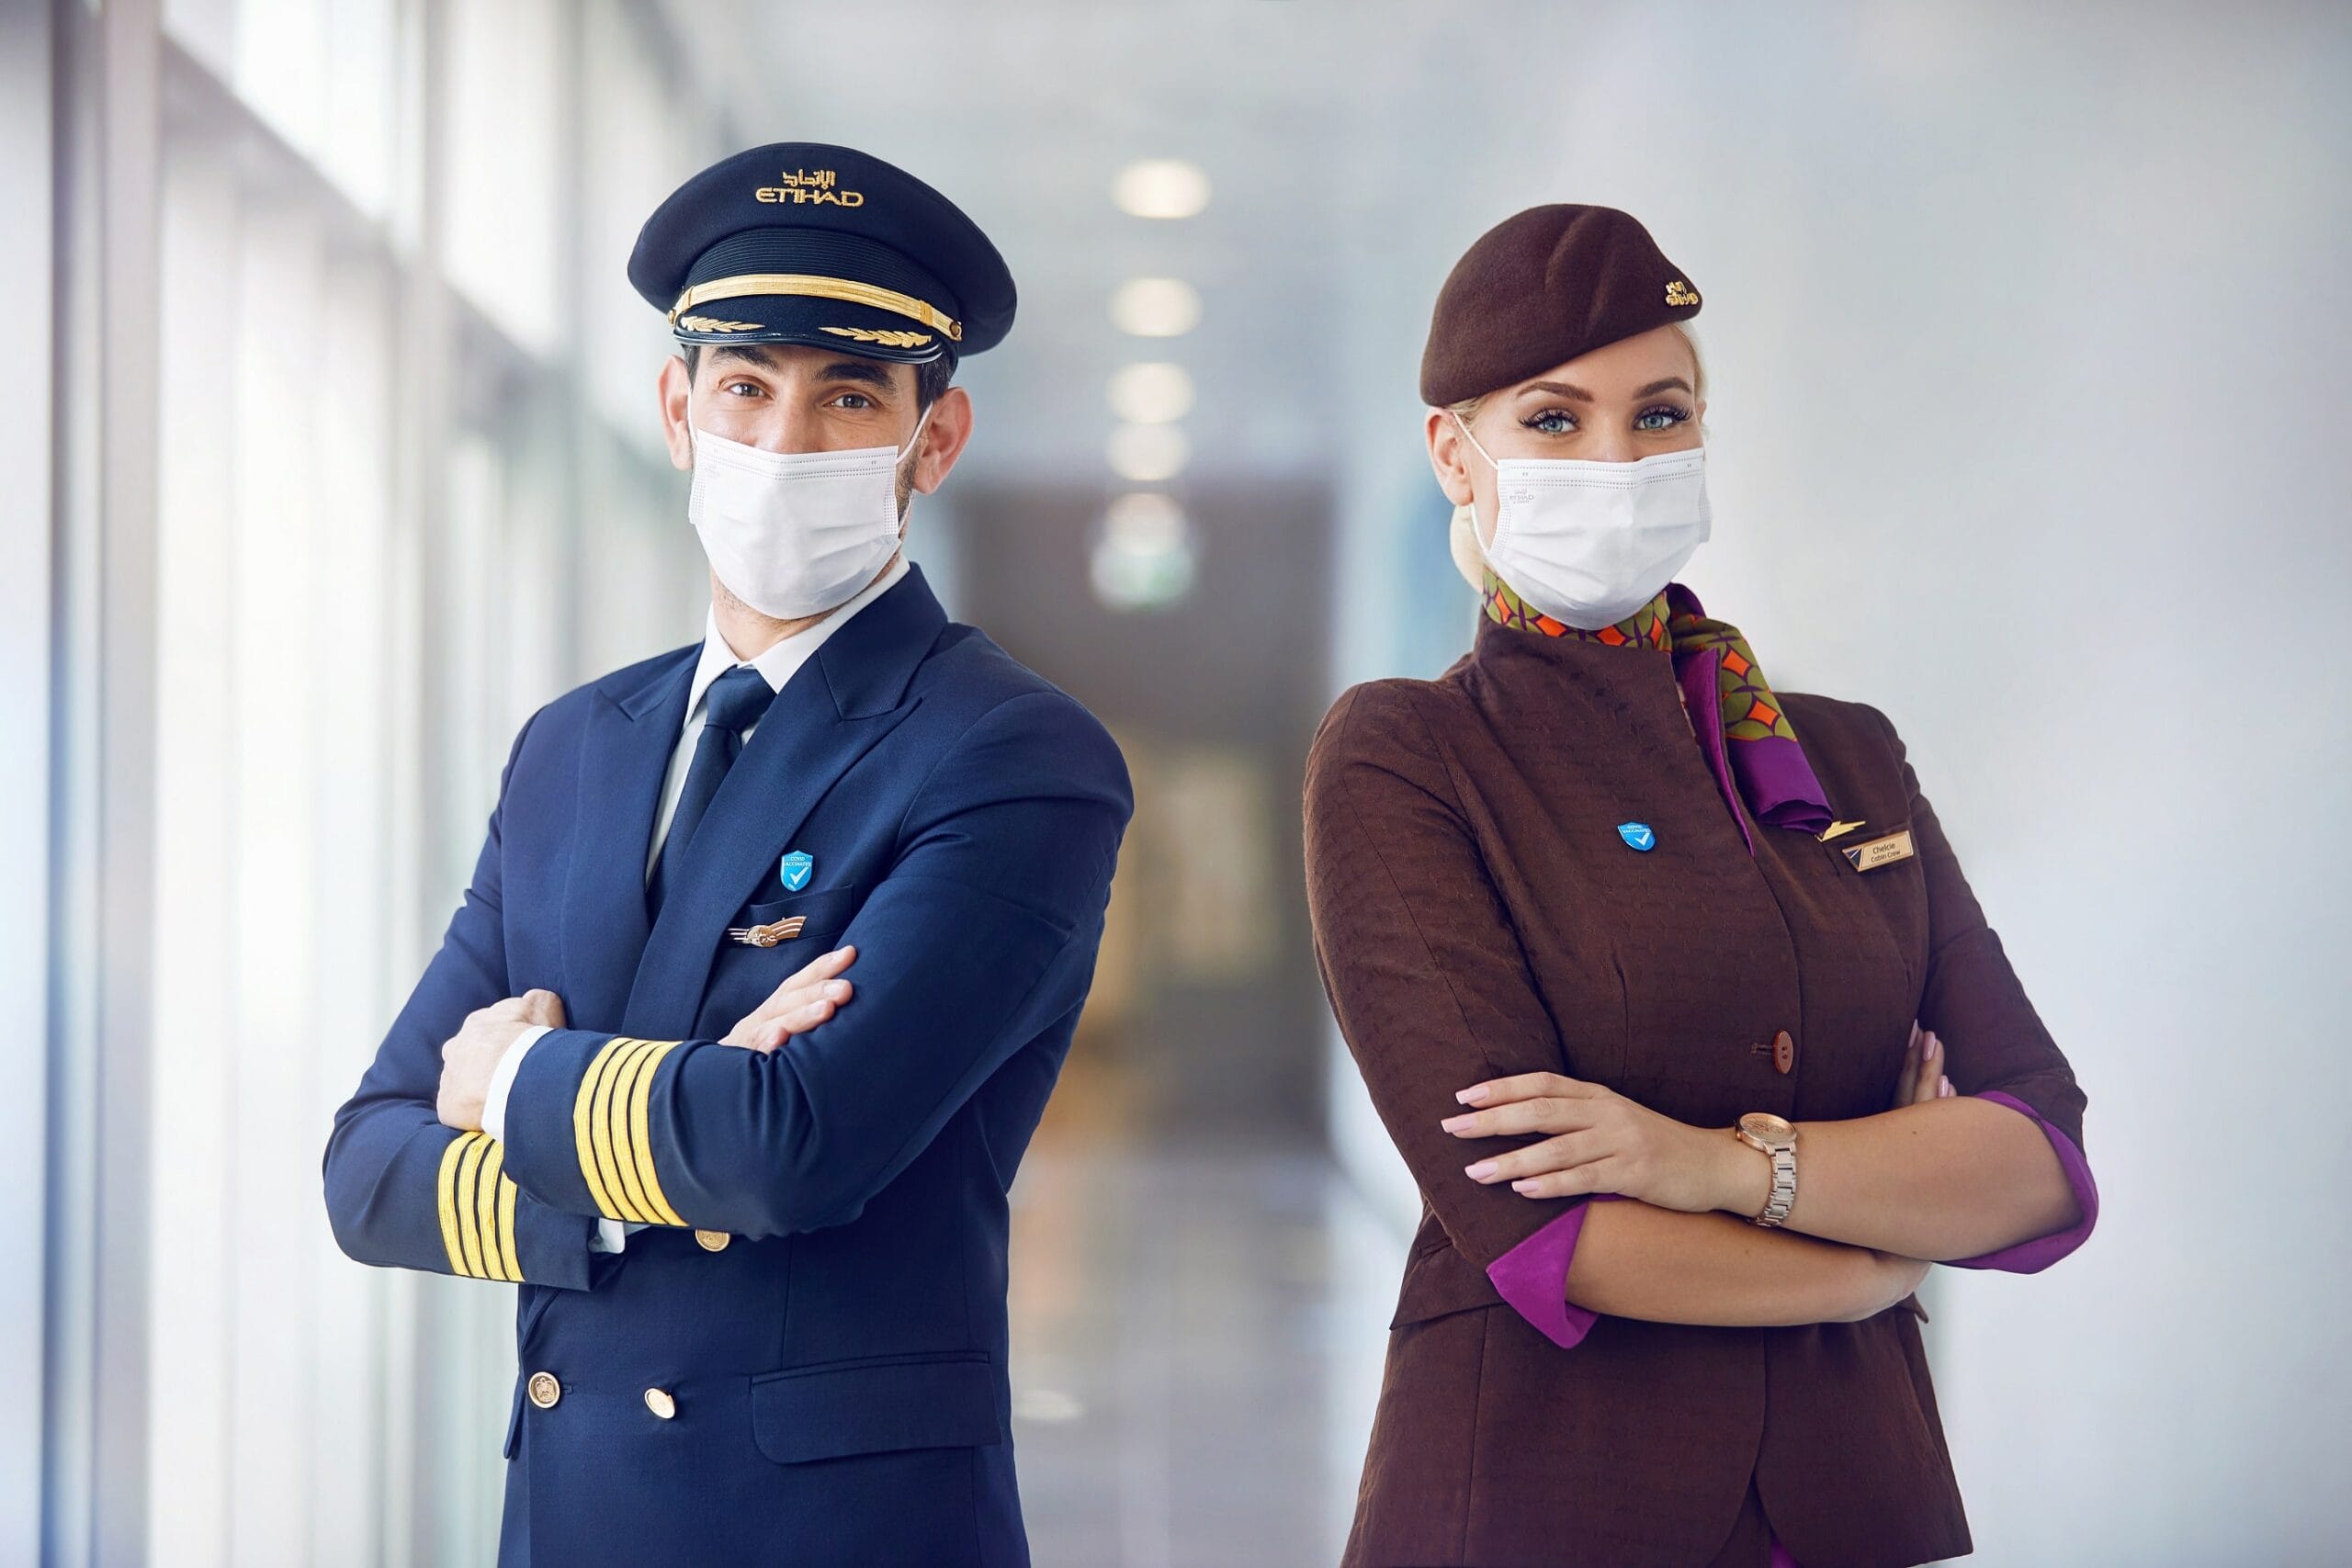 All of Etihad Airways' operating pilots and cabin crew are vaccinated against COVID-19